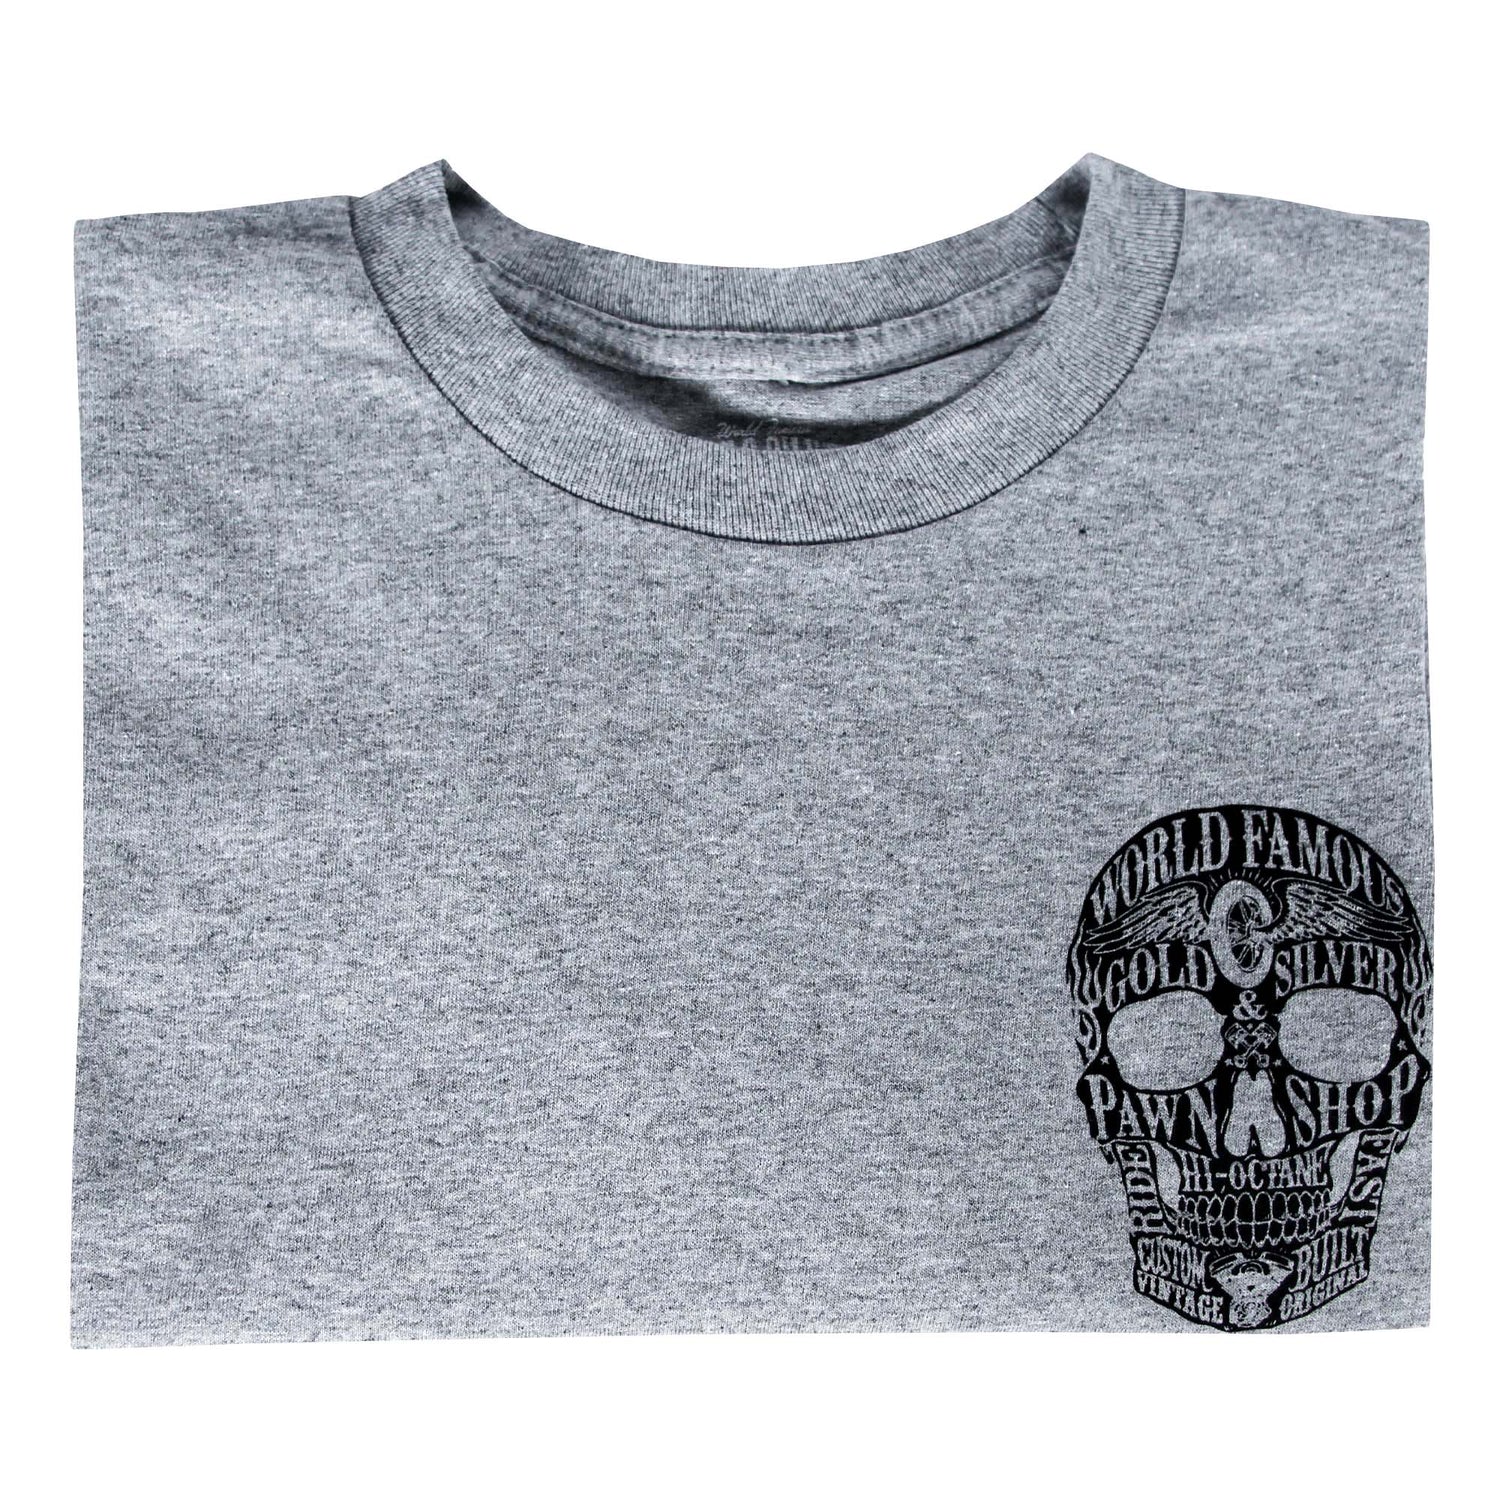 Gold & Silver Pawn Shop Long Sleeve Skull T-Shirt ZOOM